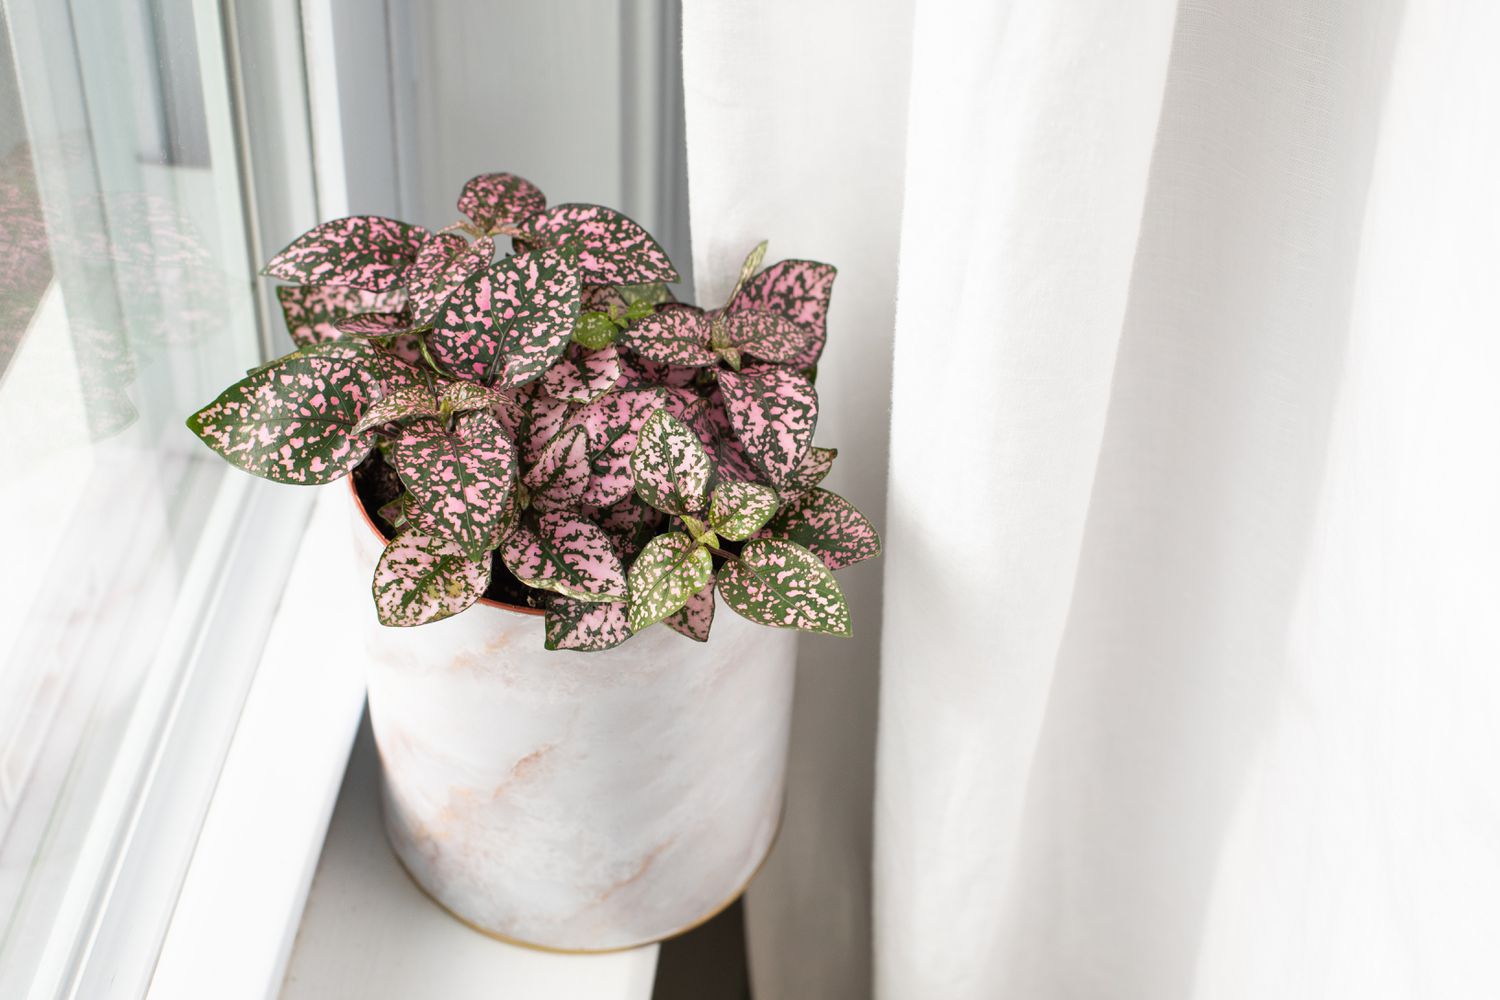 What is the polka dot plant?